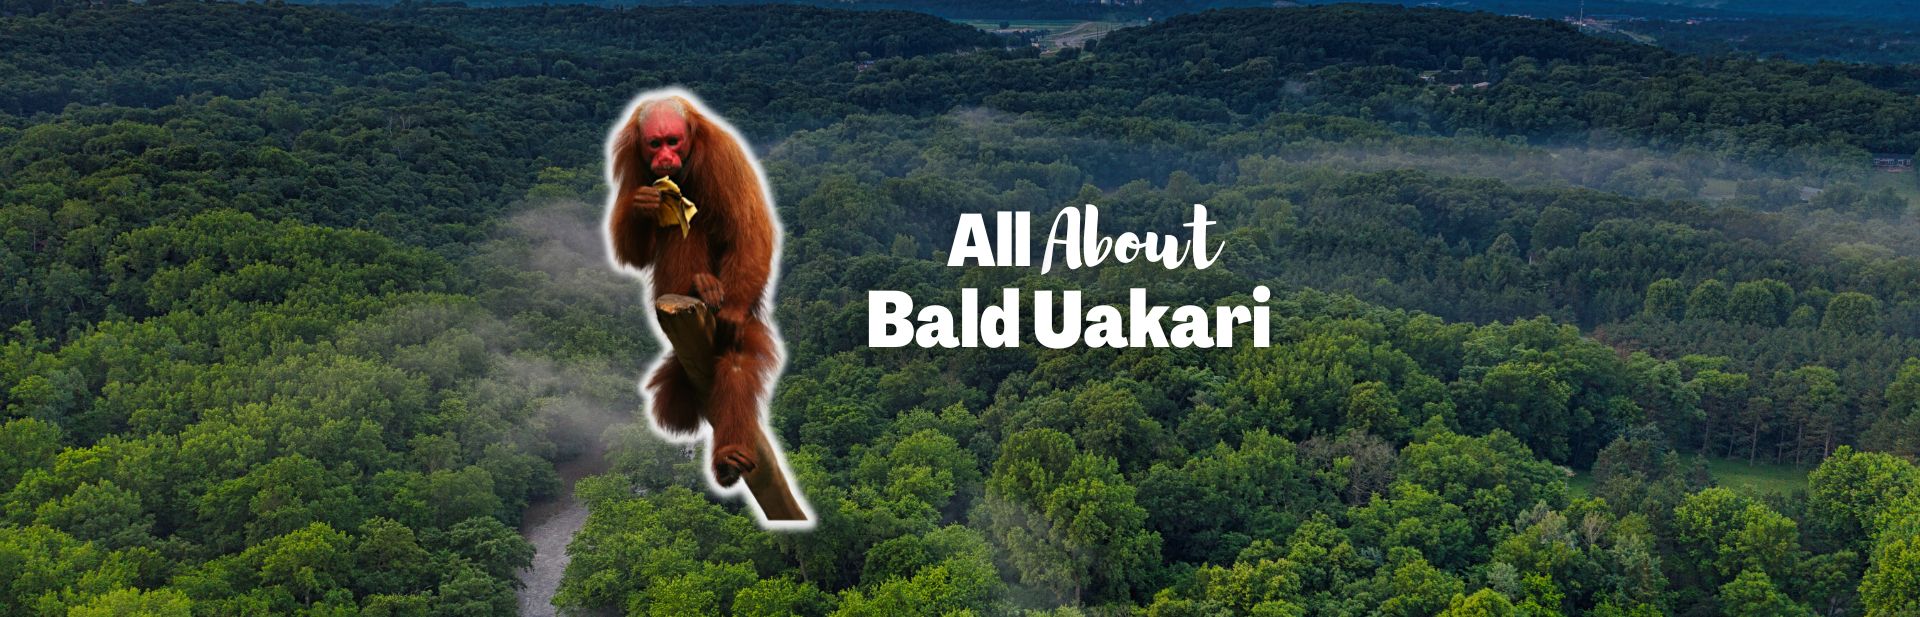 Bald Uakari: The Red-Faced Primates of the Amazon